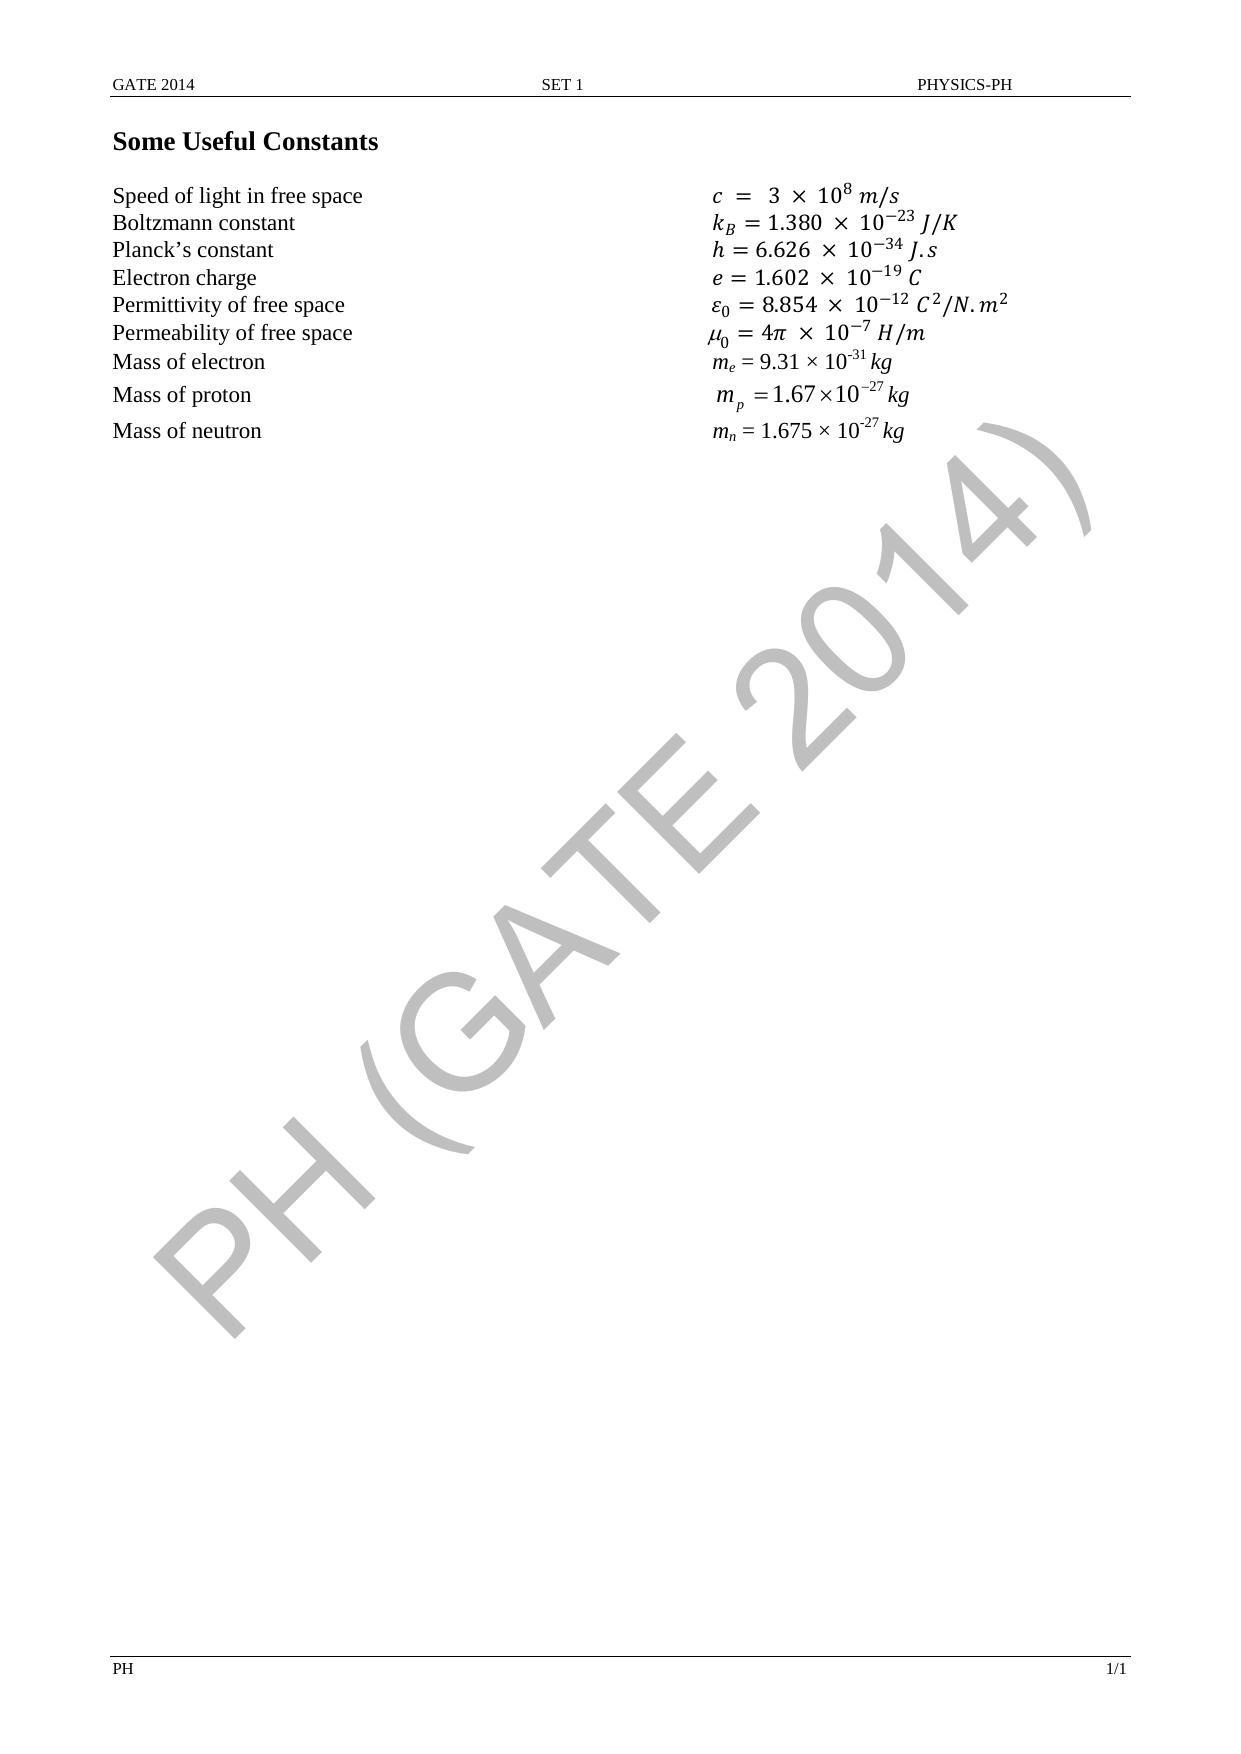 GATE 2014 Physics (PH) Question Paper with Answer Key - Page 7